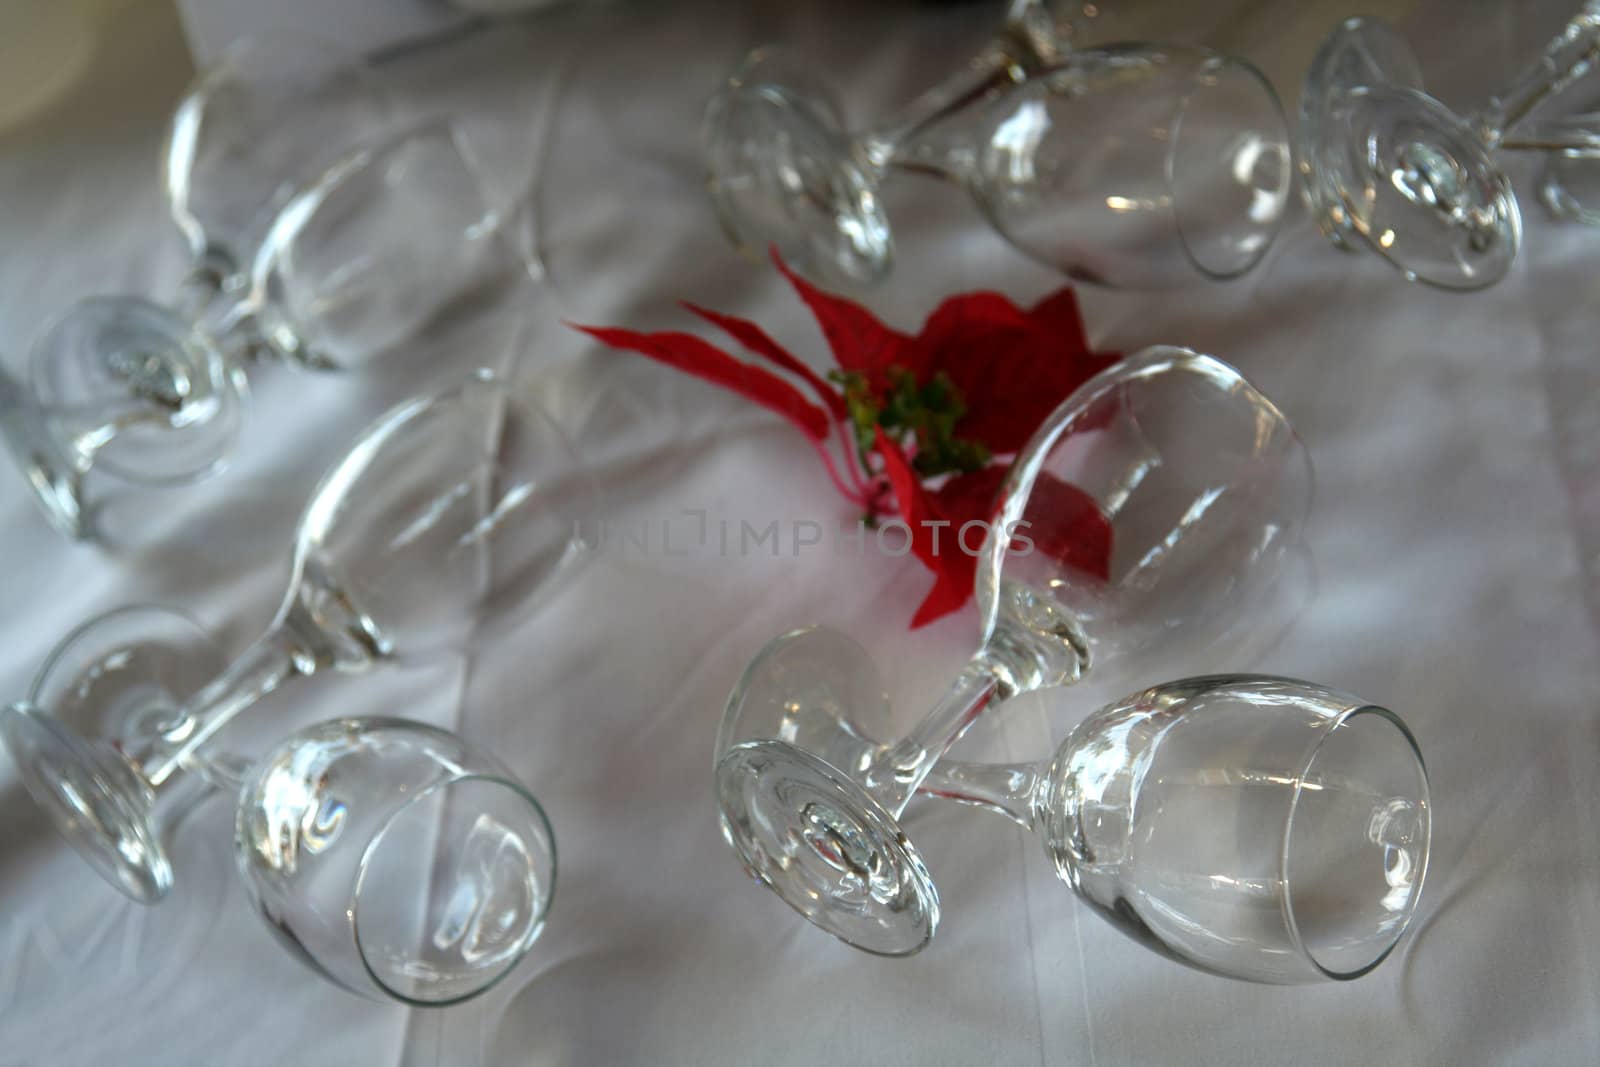 Decorative wine glass setting on a table.